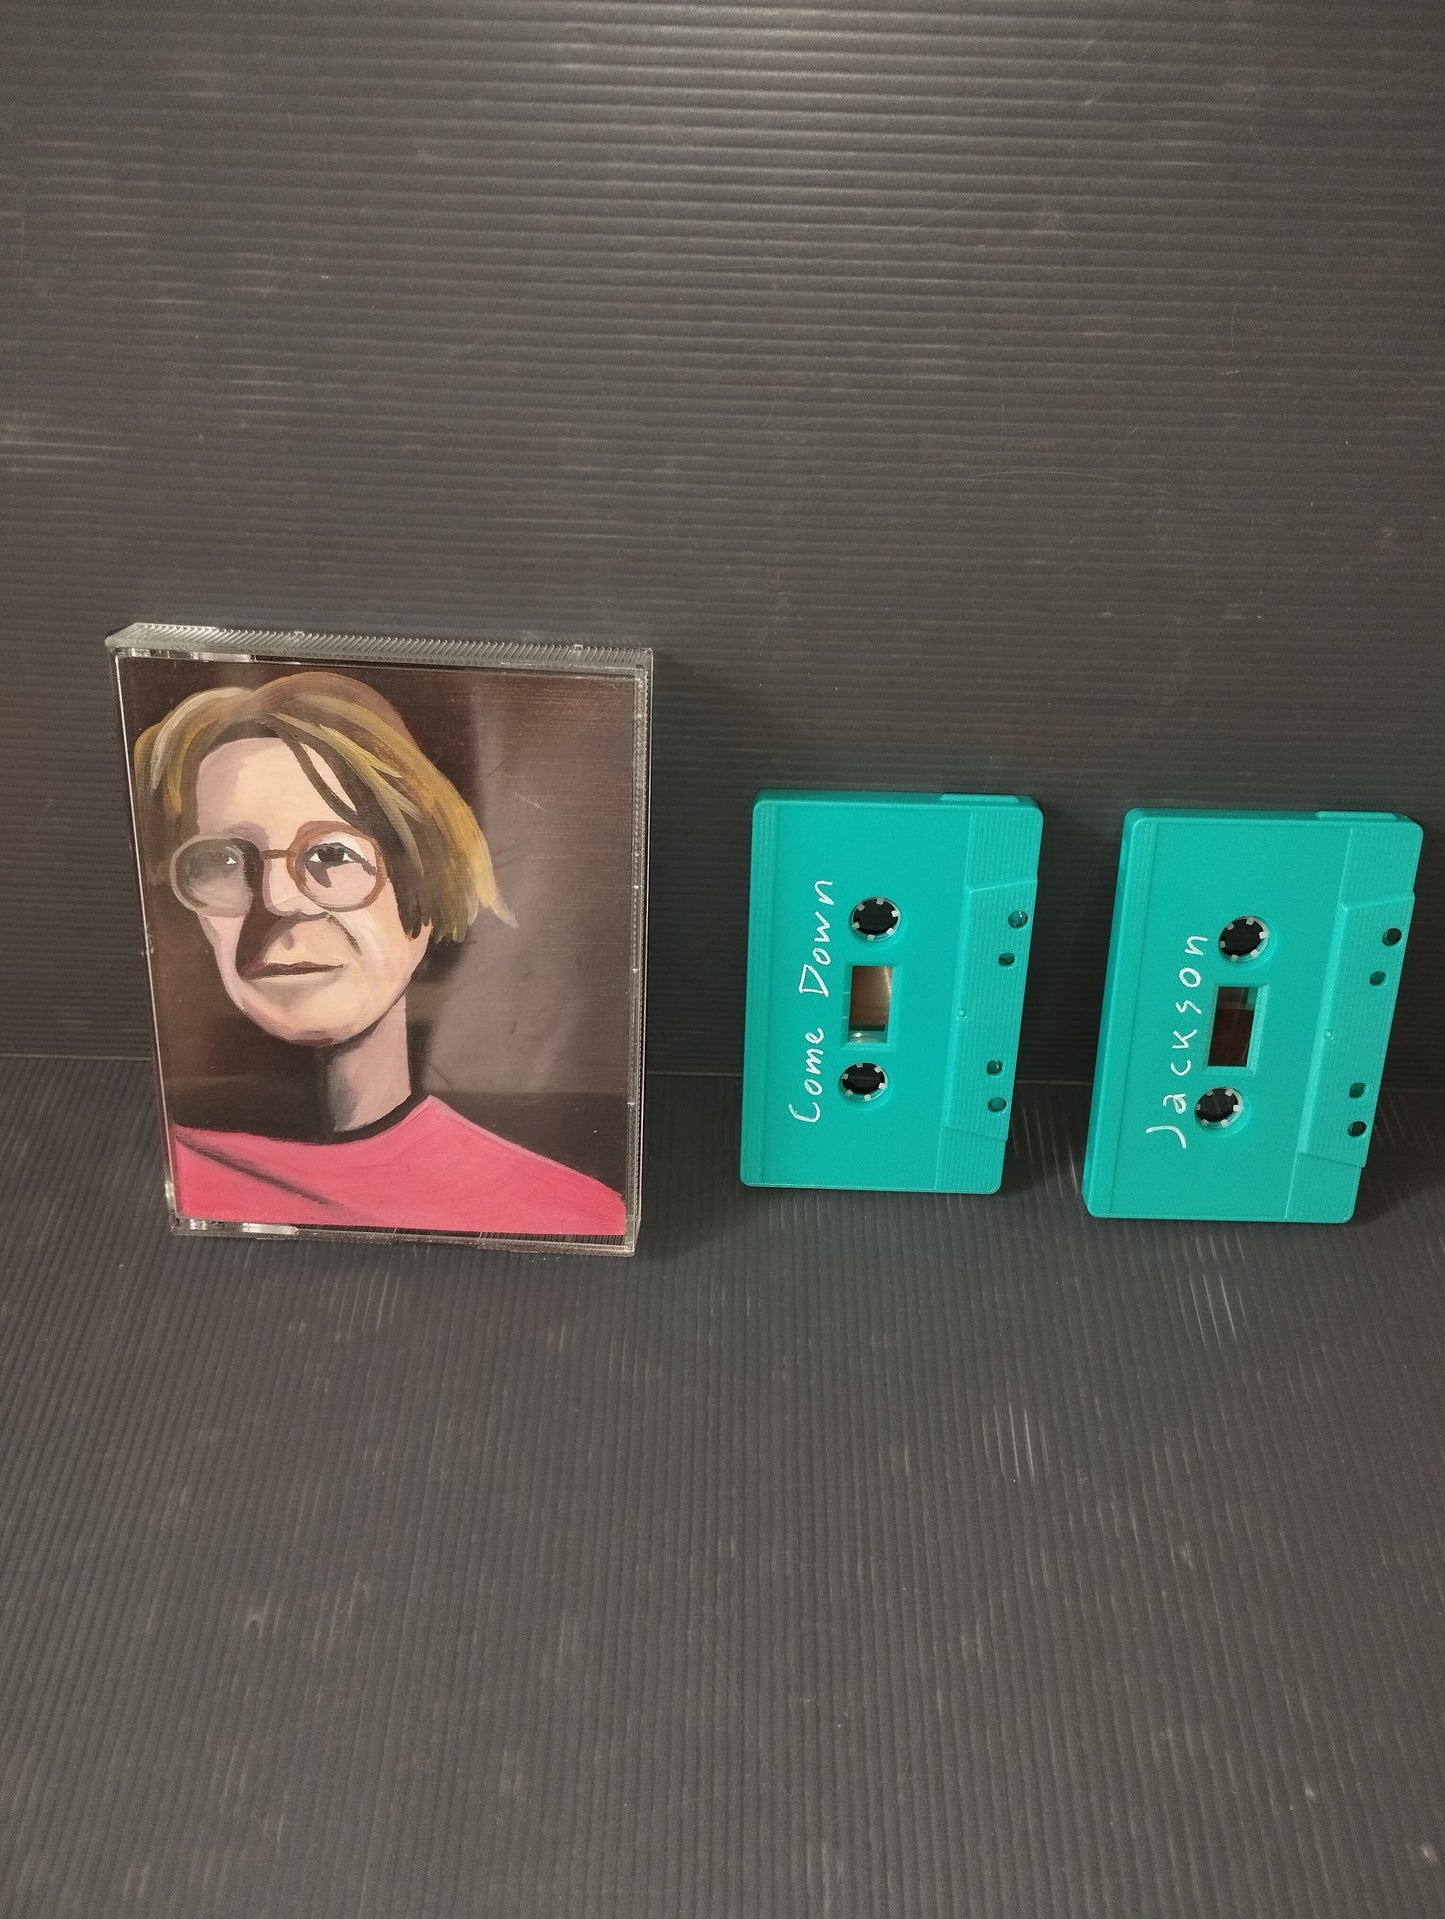 All most halloween 2 cassettes, limited edition of 50 copies